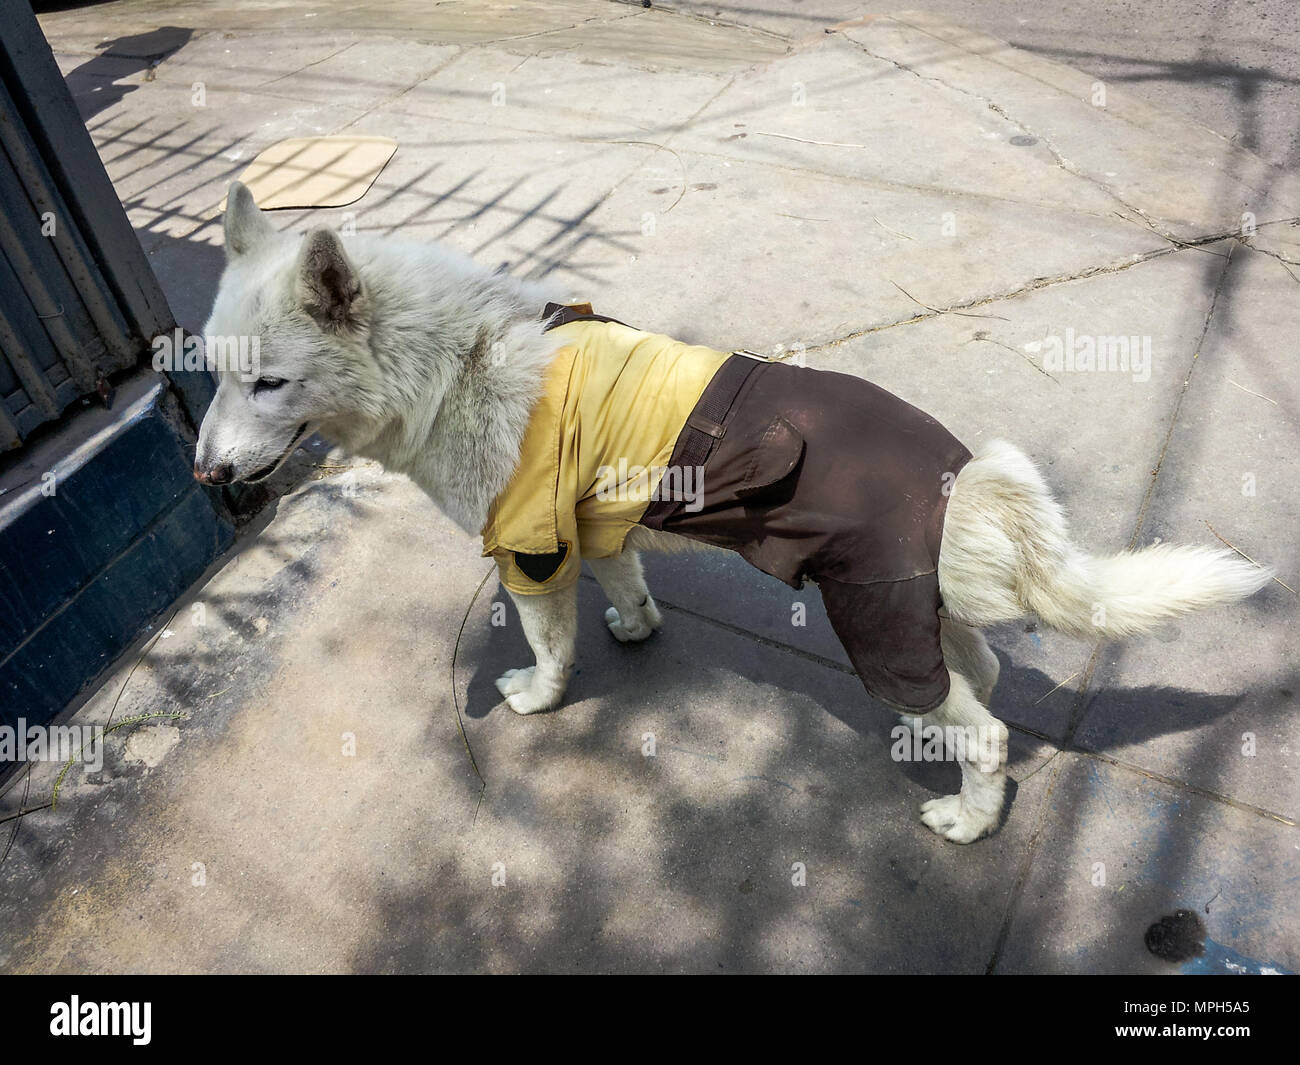 Guachiman dog with safety clothing, concept image and humor Stock Photo